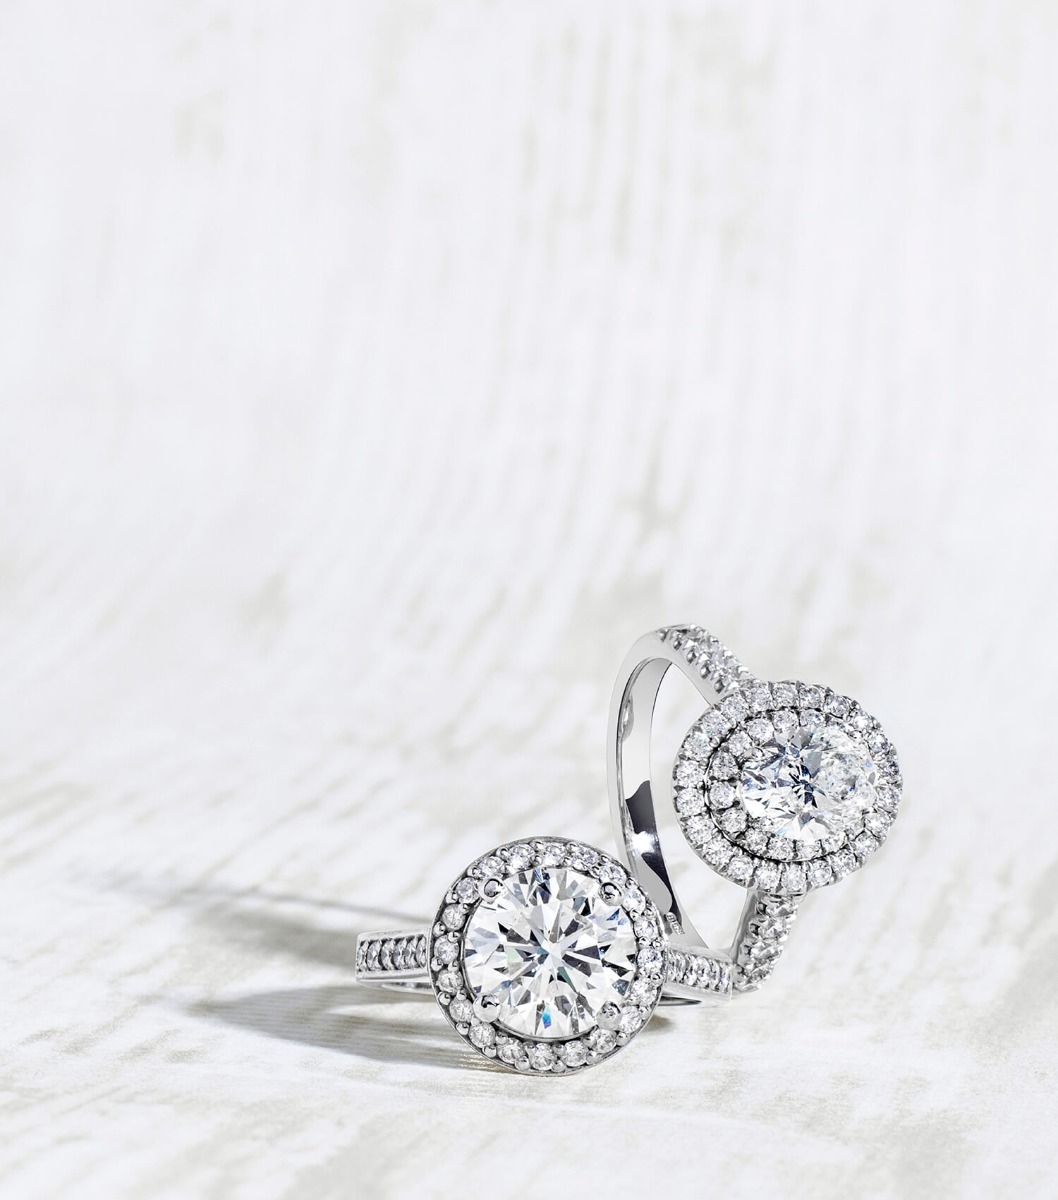 Halo & Cluster Engagement Rings